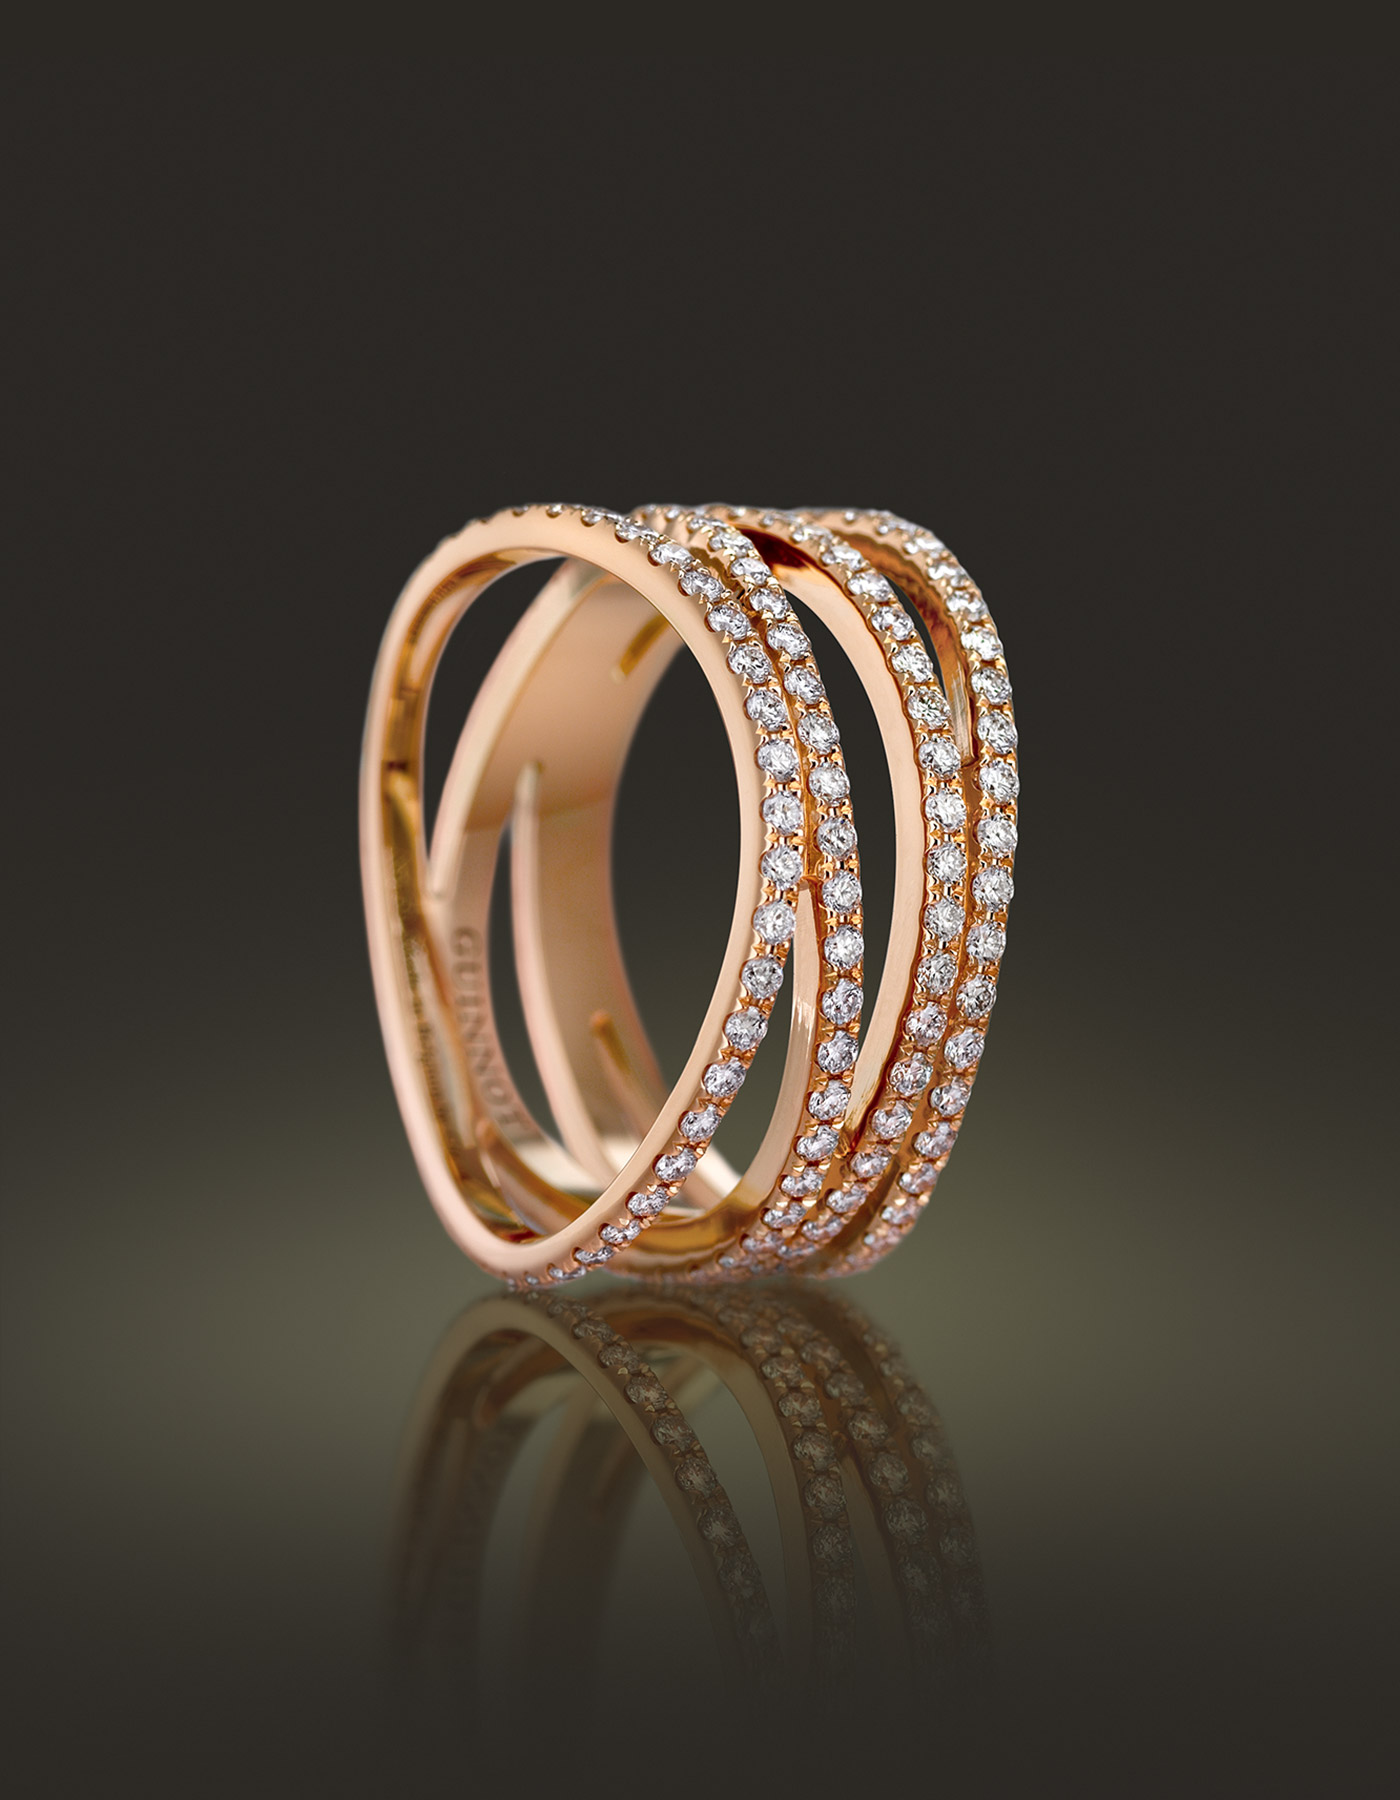 Guinnot Anonymous Micropavé diamond spiral ring in 18k rose gold